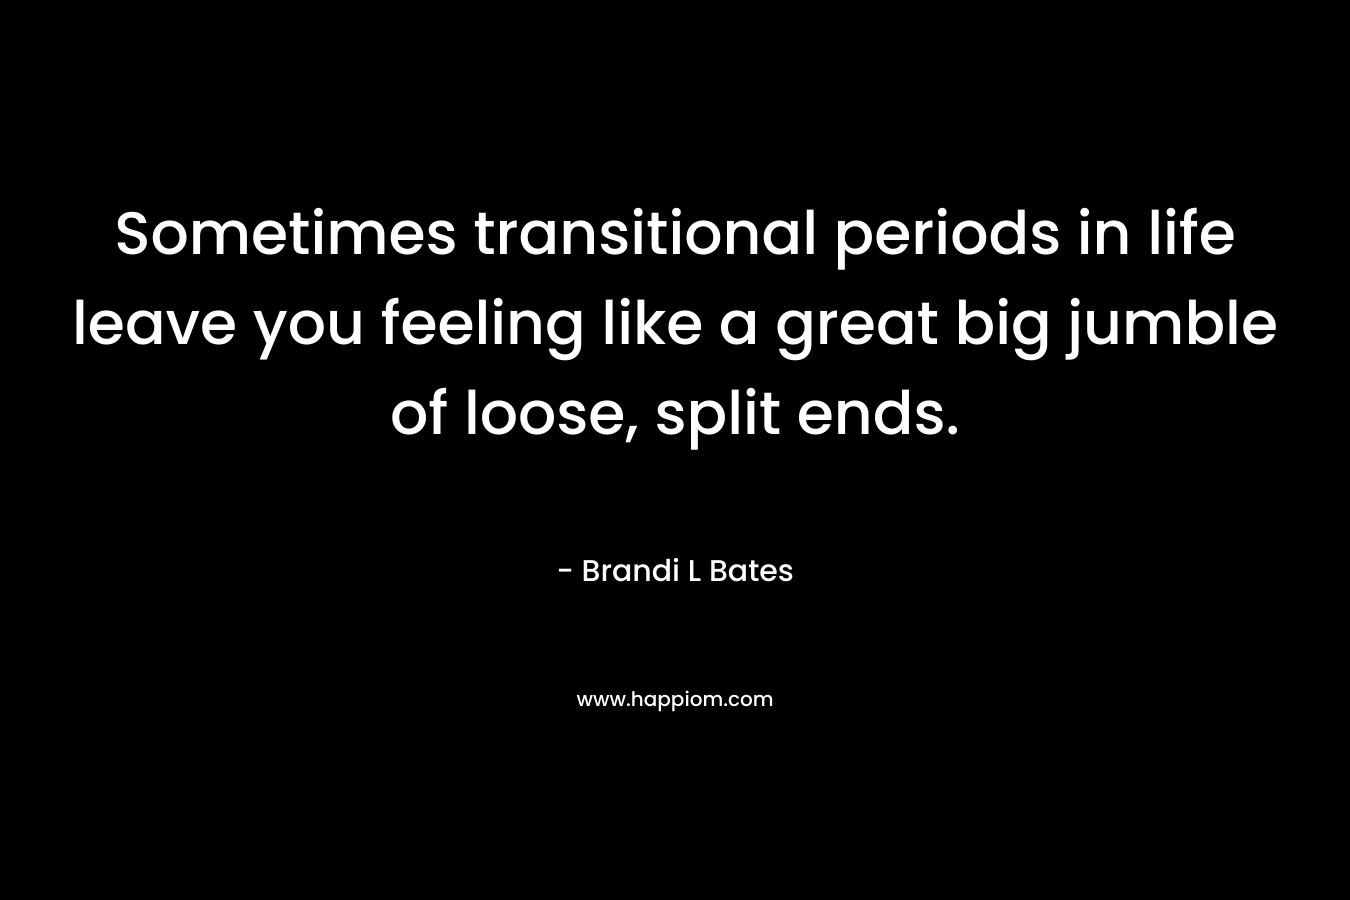 Sometimes transitional periods in life leave you feeling like a great big jumble of loose, split ends. – Brandi L Bates